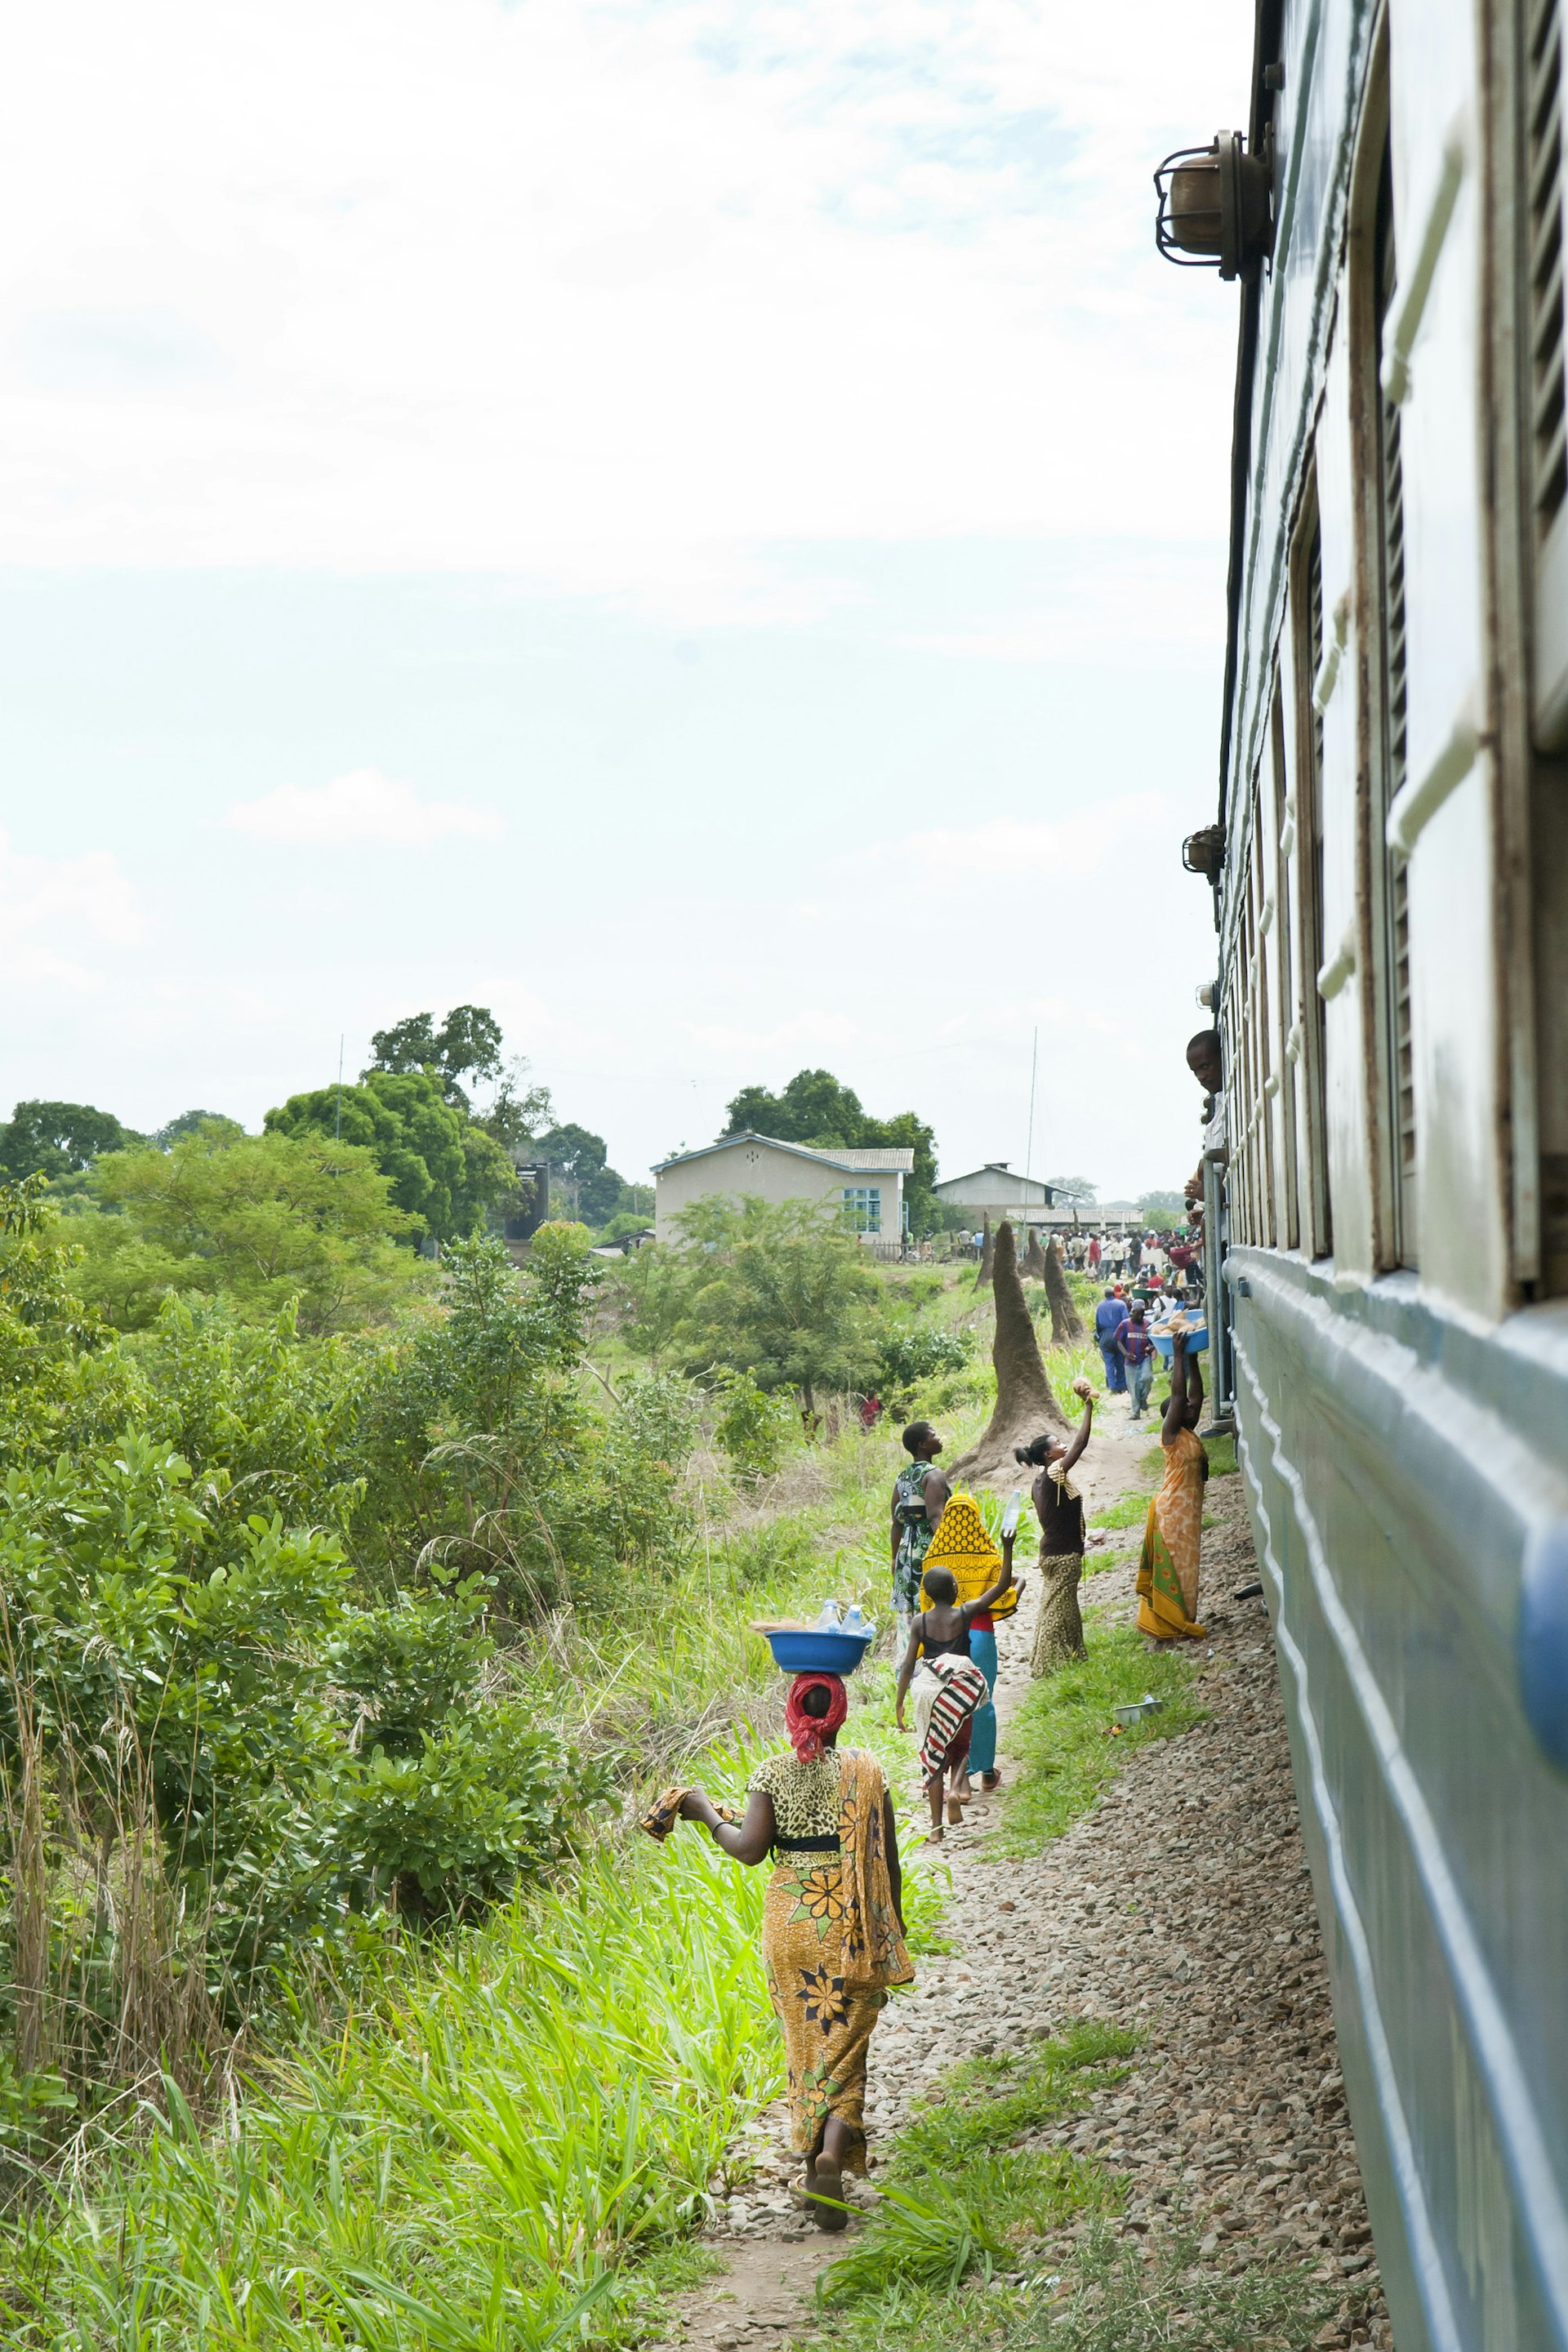 Women selling drinks and food through the windows of a train during a stop, Tanzania